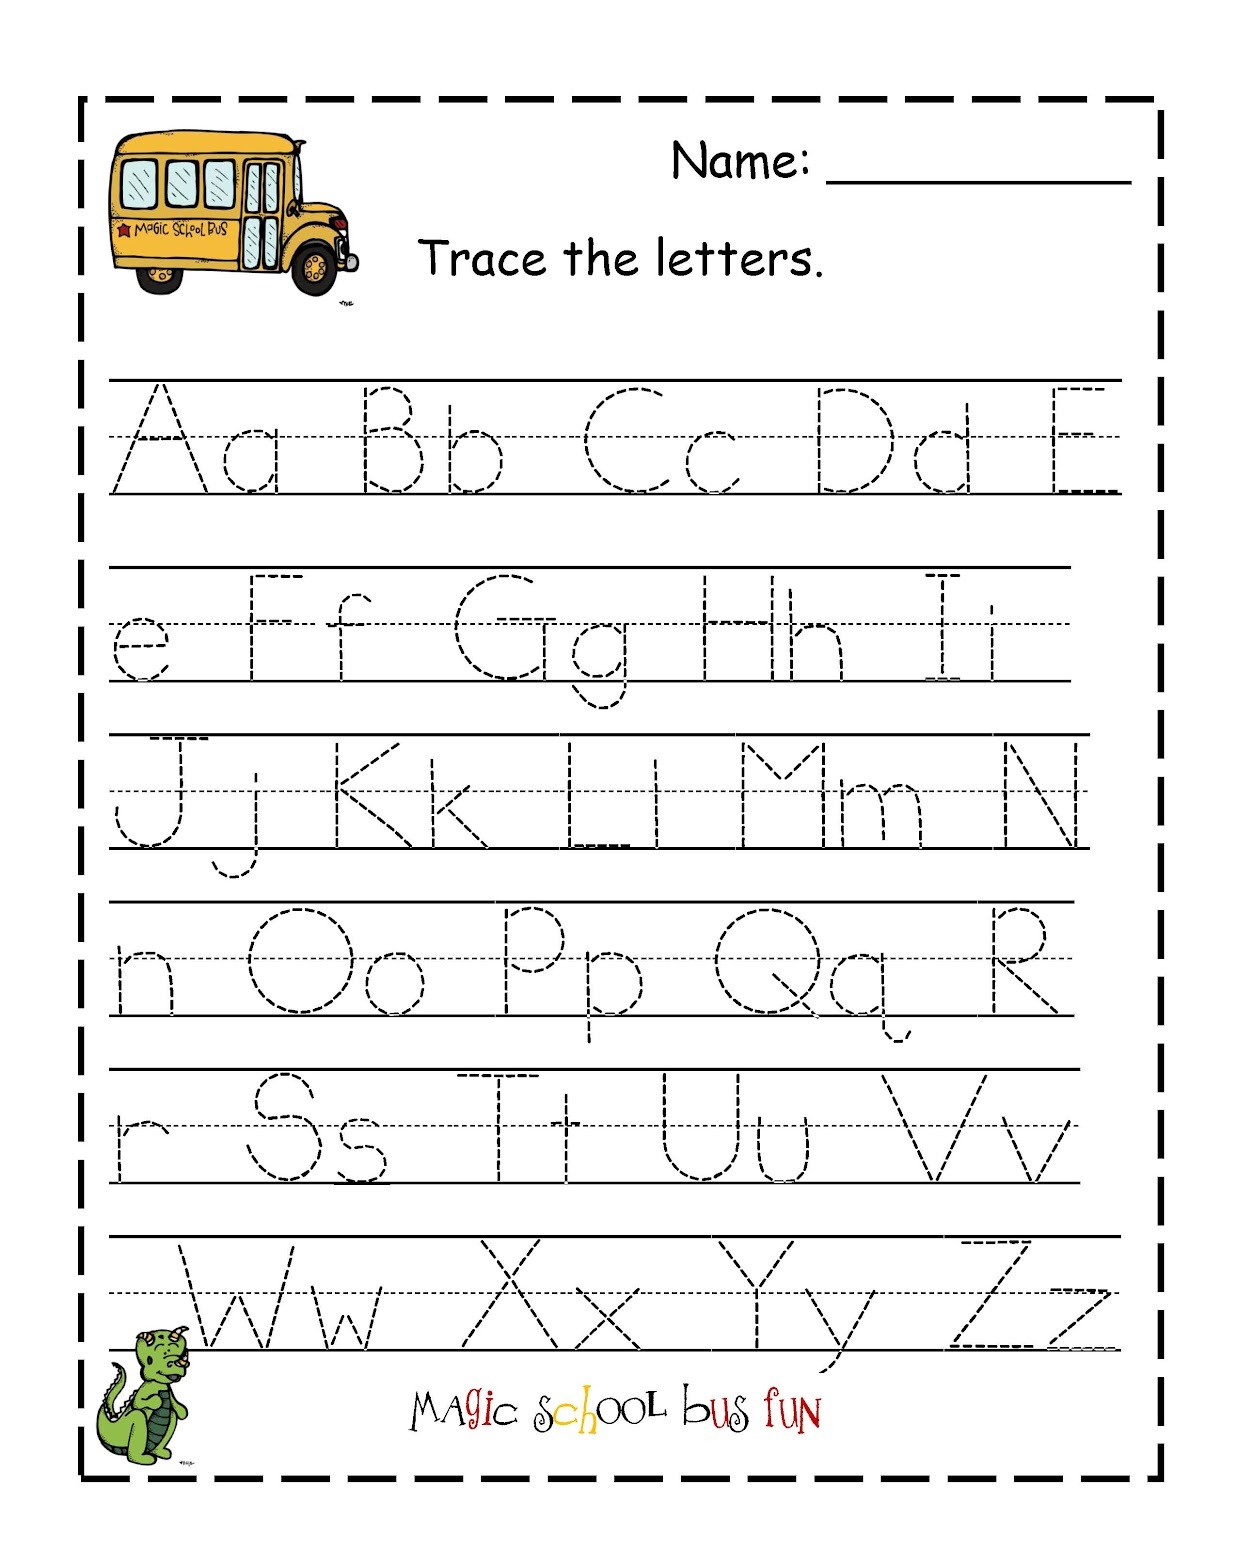 abcd-tracing-worksheet-alphabetworksheetsfreecom-traceable-letter-worksheets-to-print-activity